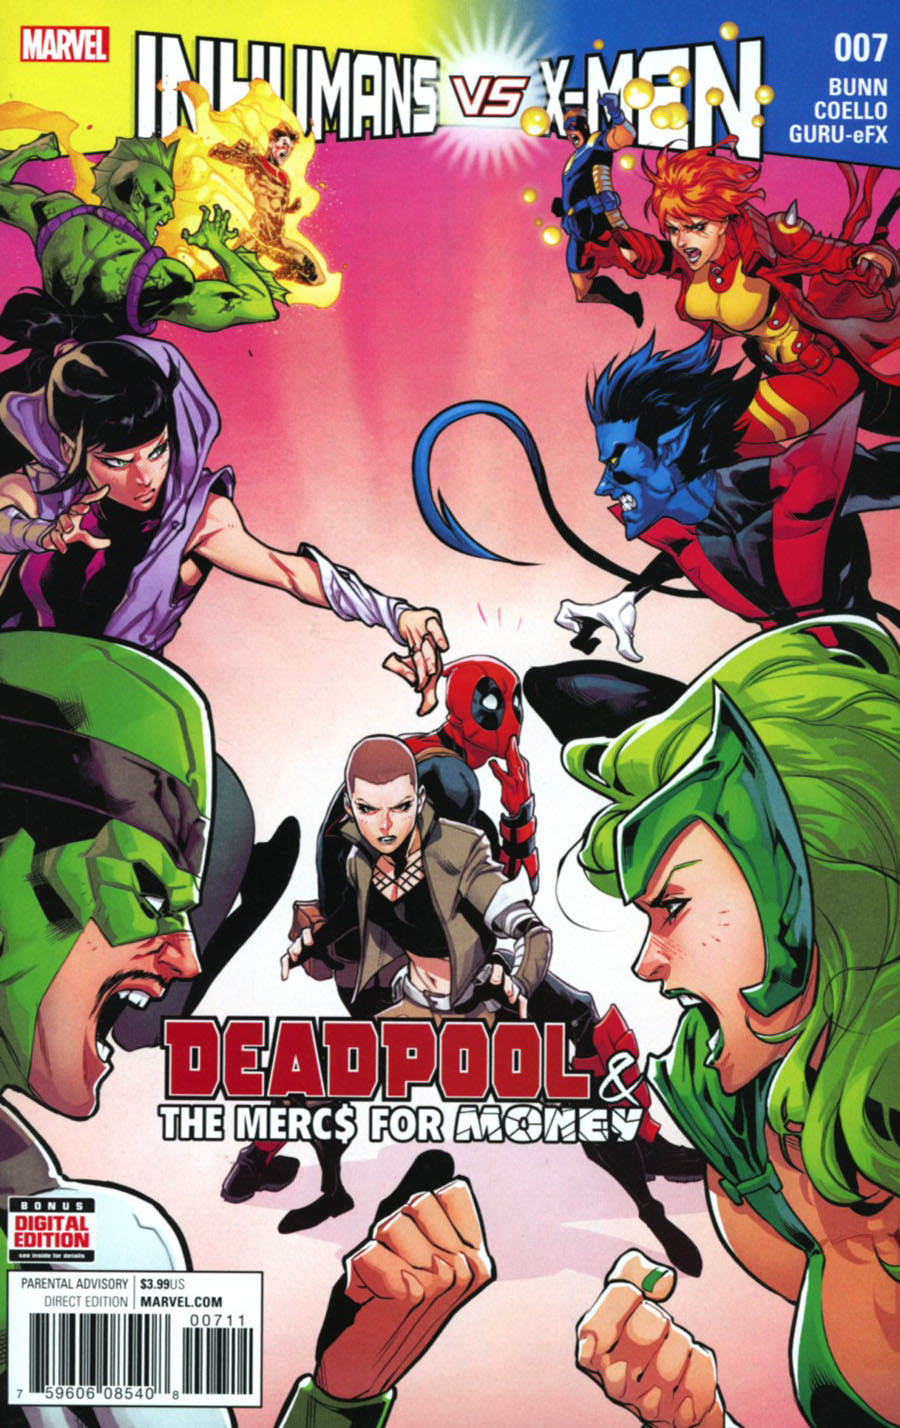 Deadpool And The Mercs For Money Vol 2 #7 Cover A Regular Iban Coello Cover (Inhumans vs X-Men Tie-In)